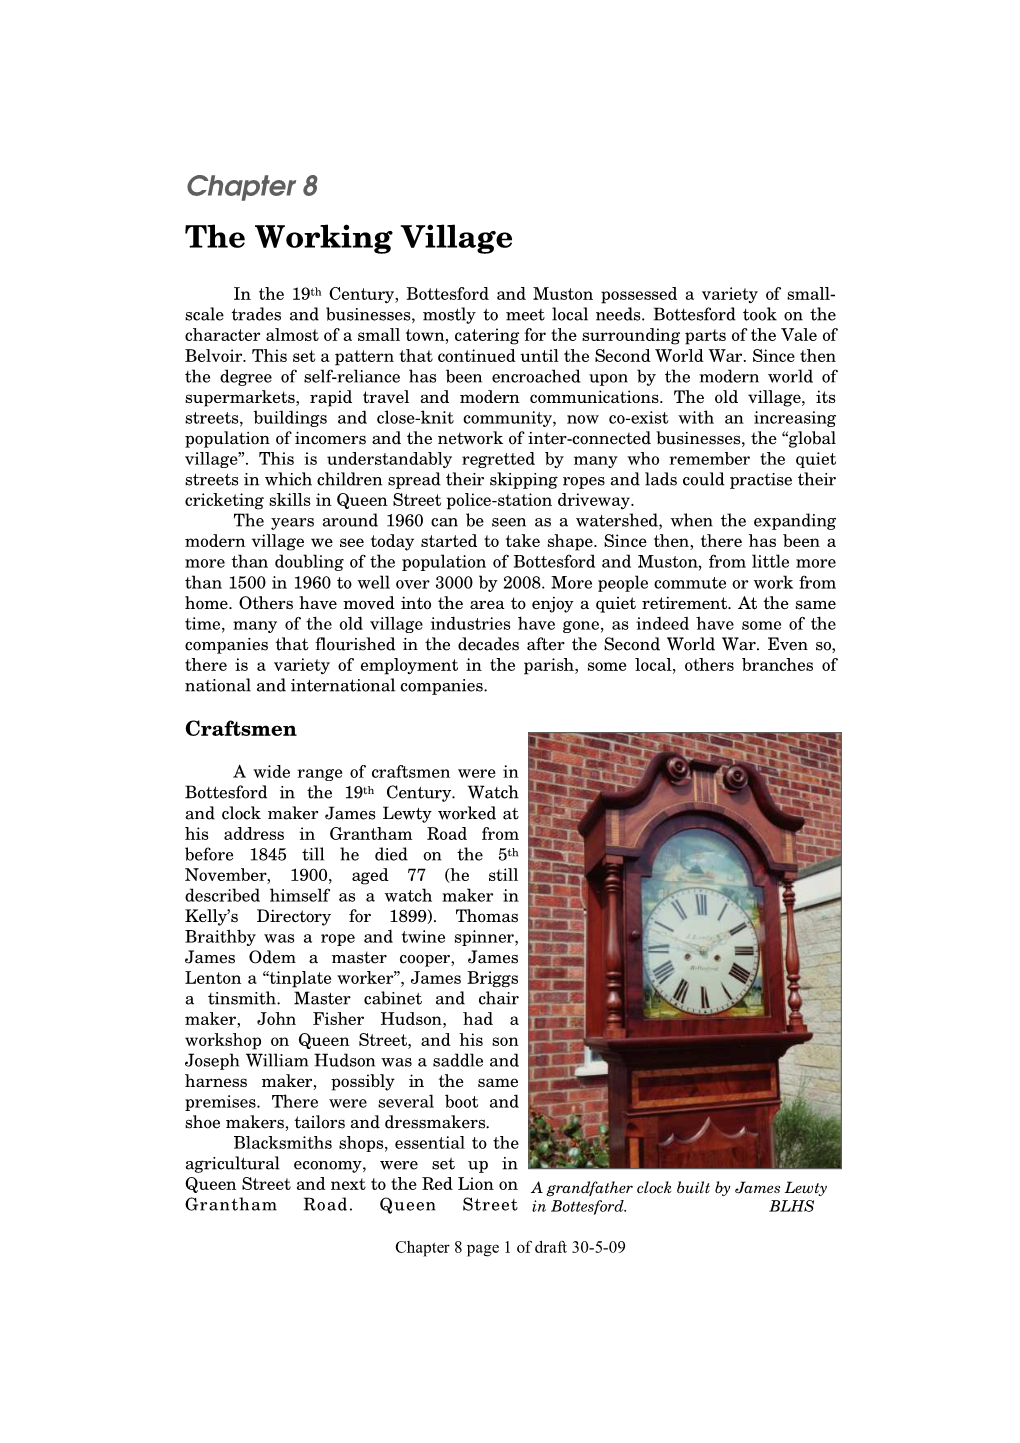 Chapter 8 the Working Village